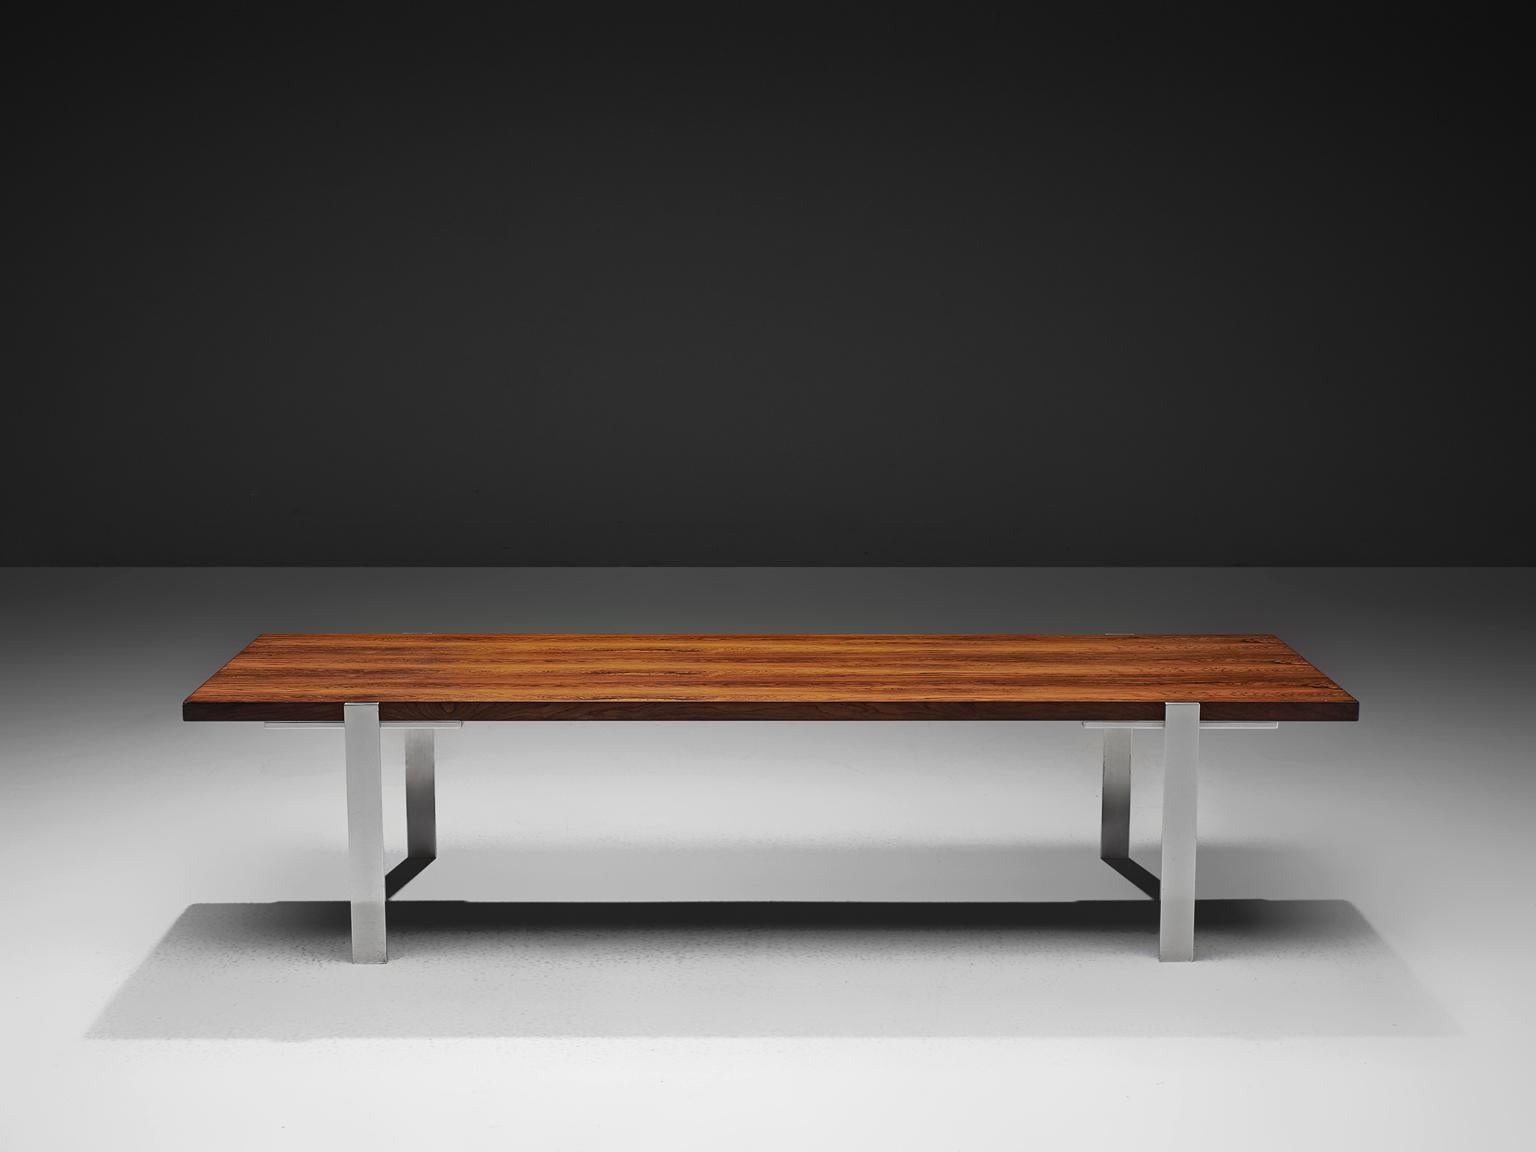 Coffee table, rosewood and stainless steel, the Netherlands, 1960s.

The rectangular top is made with rosewood veneer slats, in wonderful different tones. The warm expression of the basic top beautifully contrasts to the thin straight steel legs.